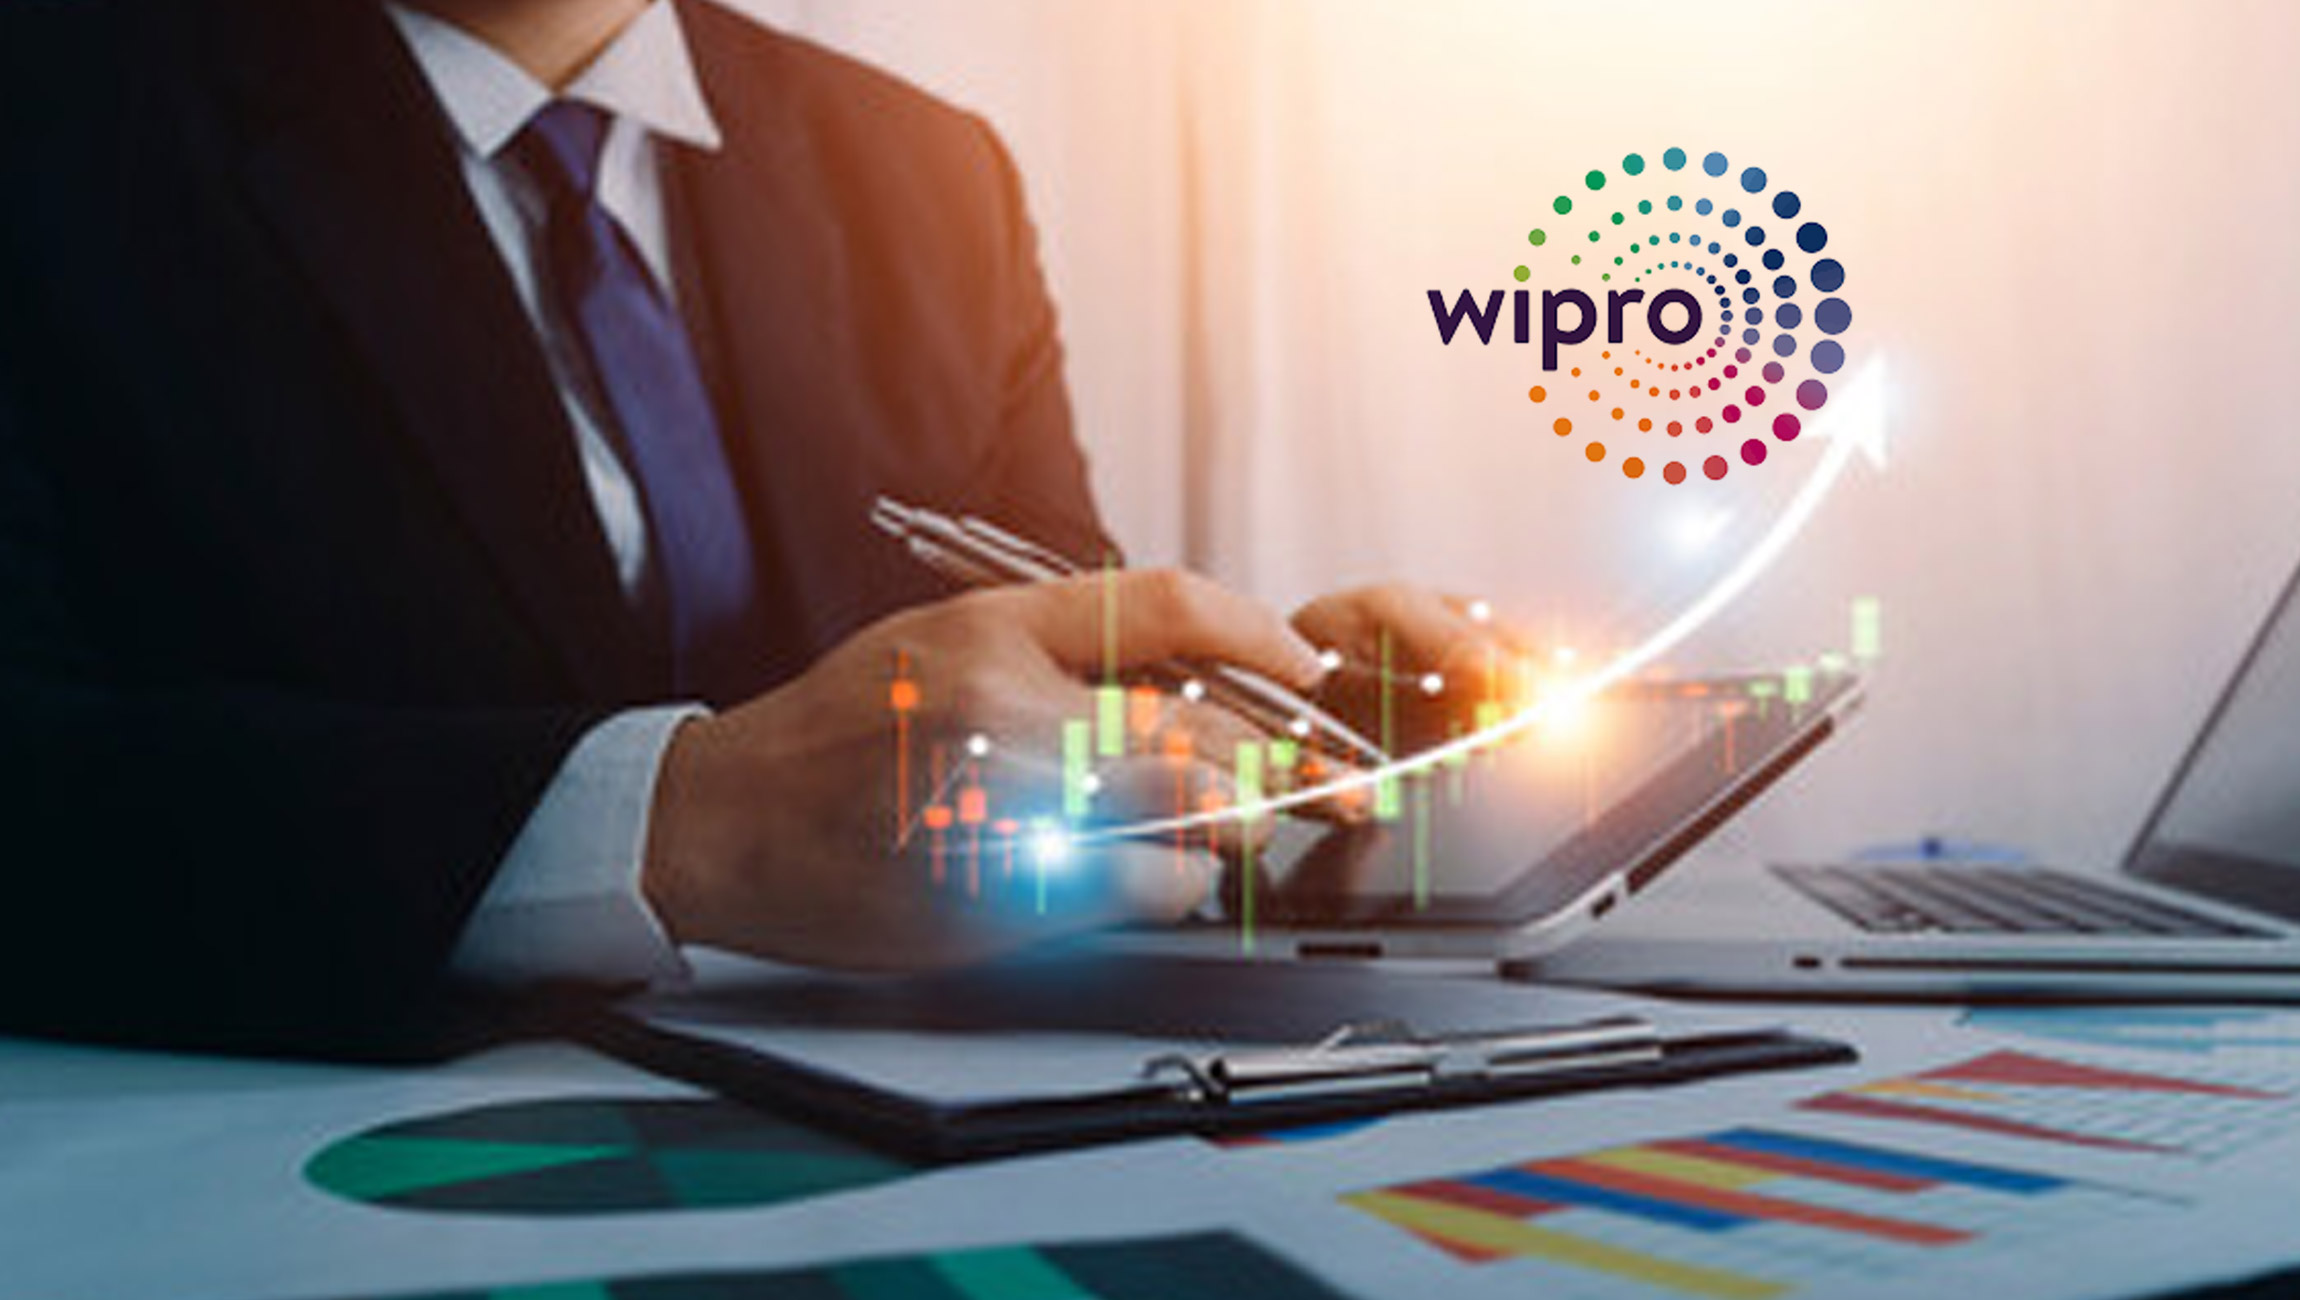 The Manufacturing Industry Is The Most Advanced In Cloud Adoption: Wipro Report